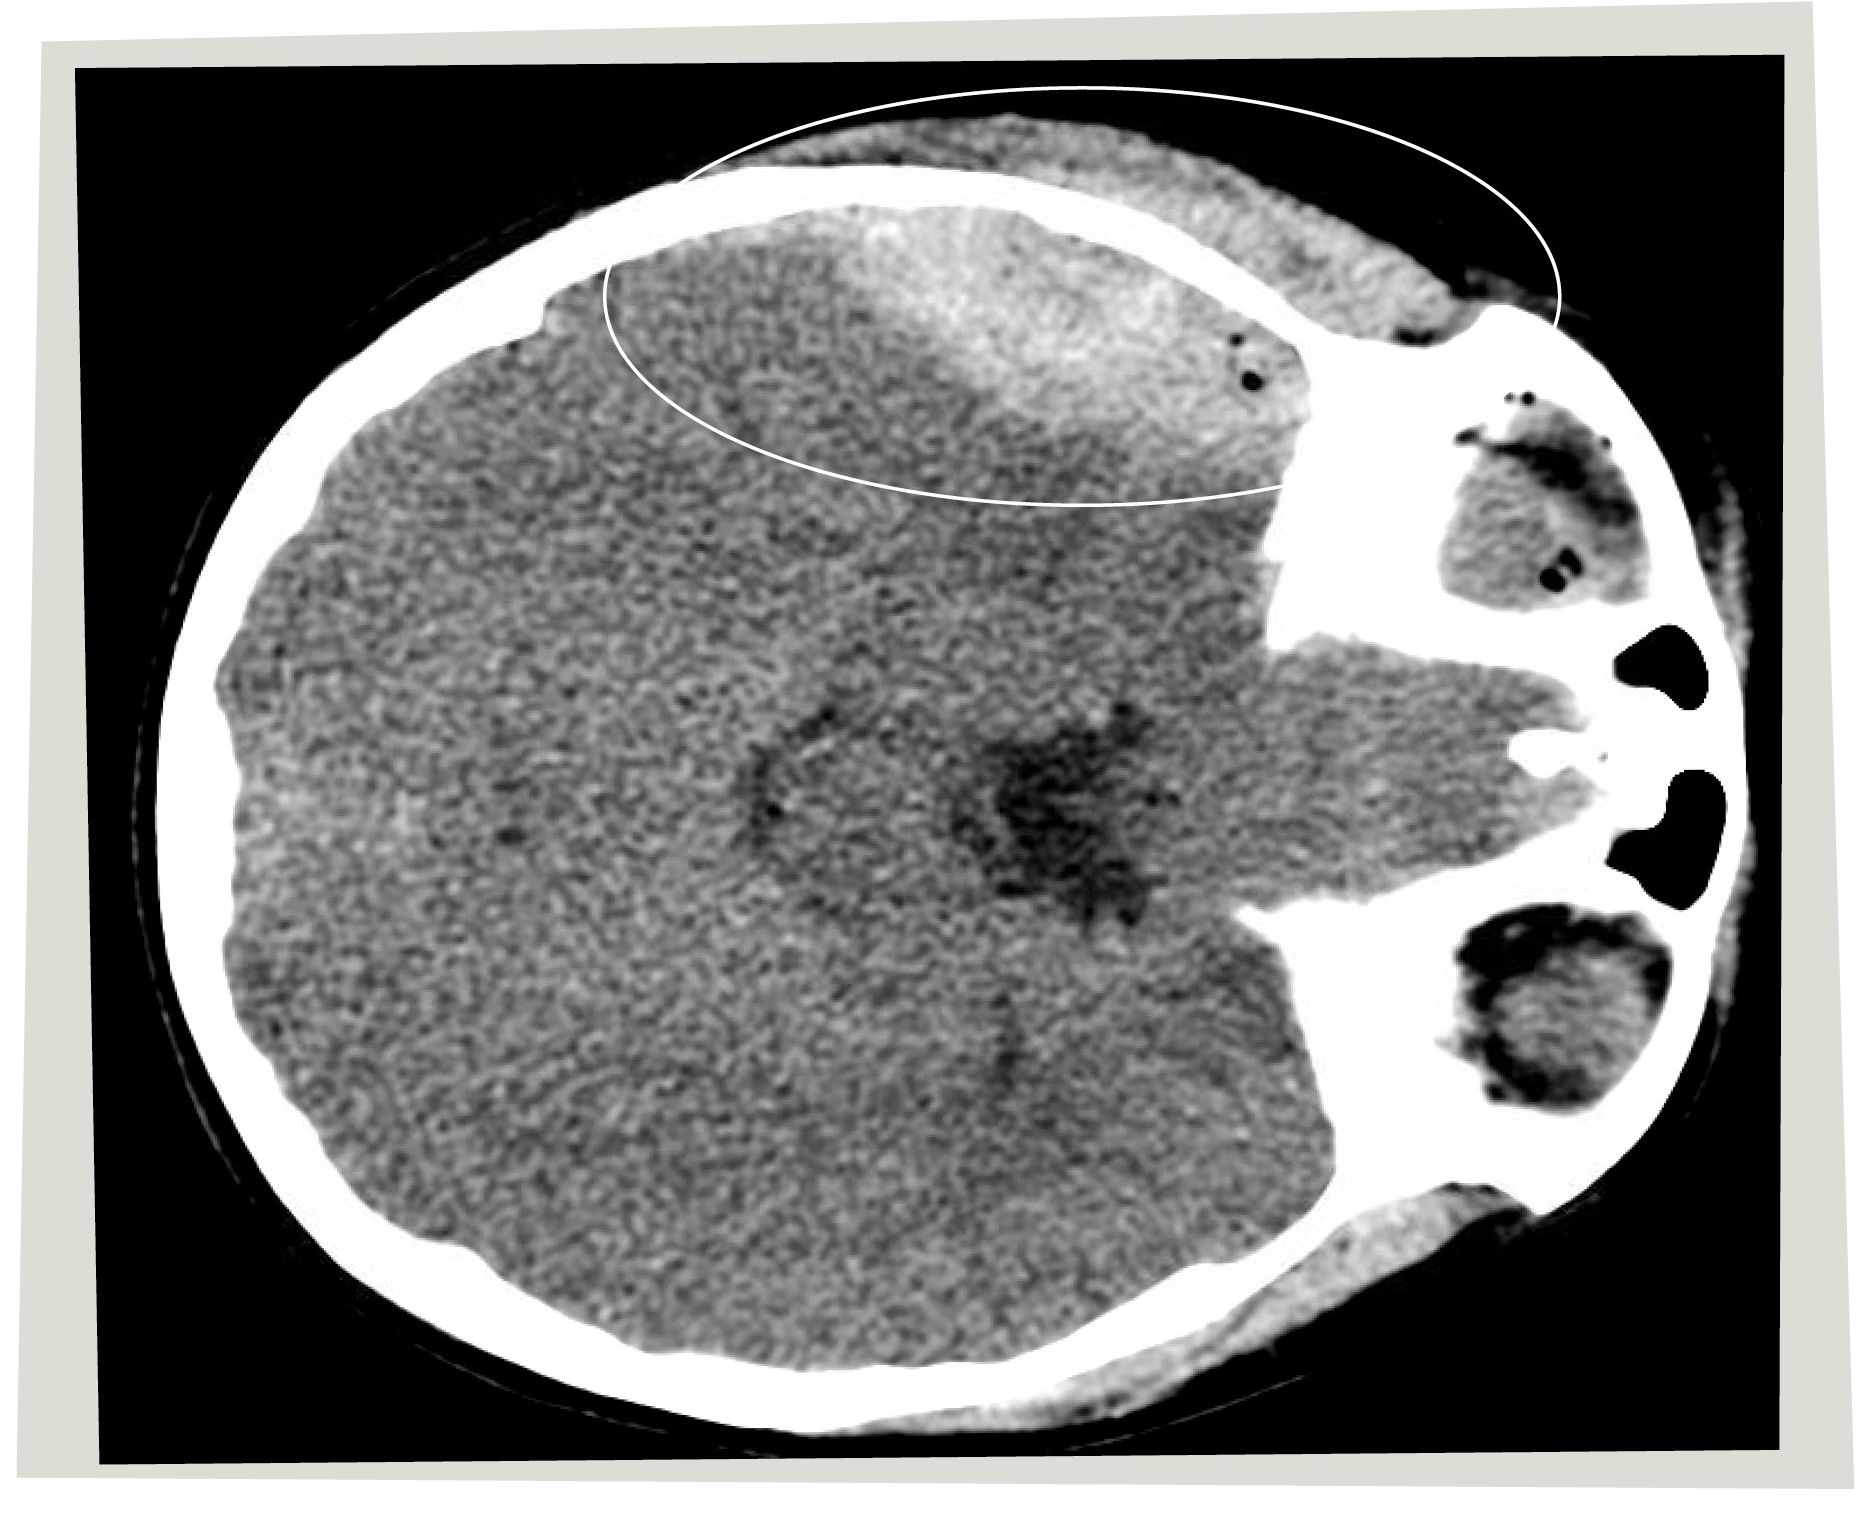 Brayden's CT scan showing an area of white where the acute traumatic epidural hematoma occurred.